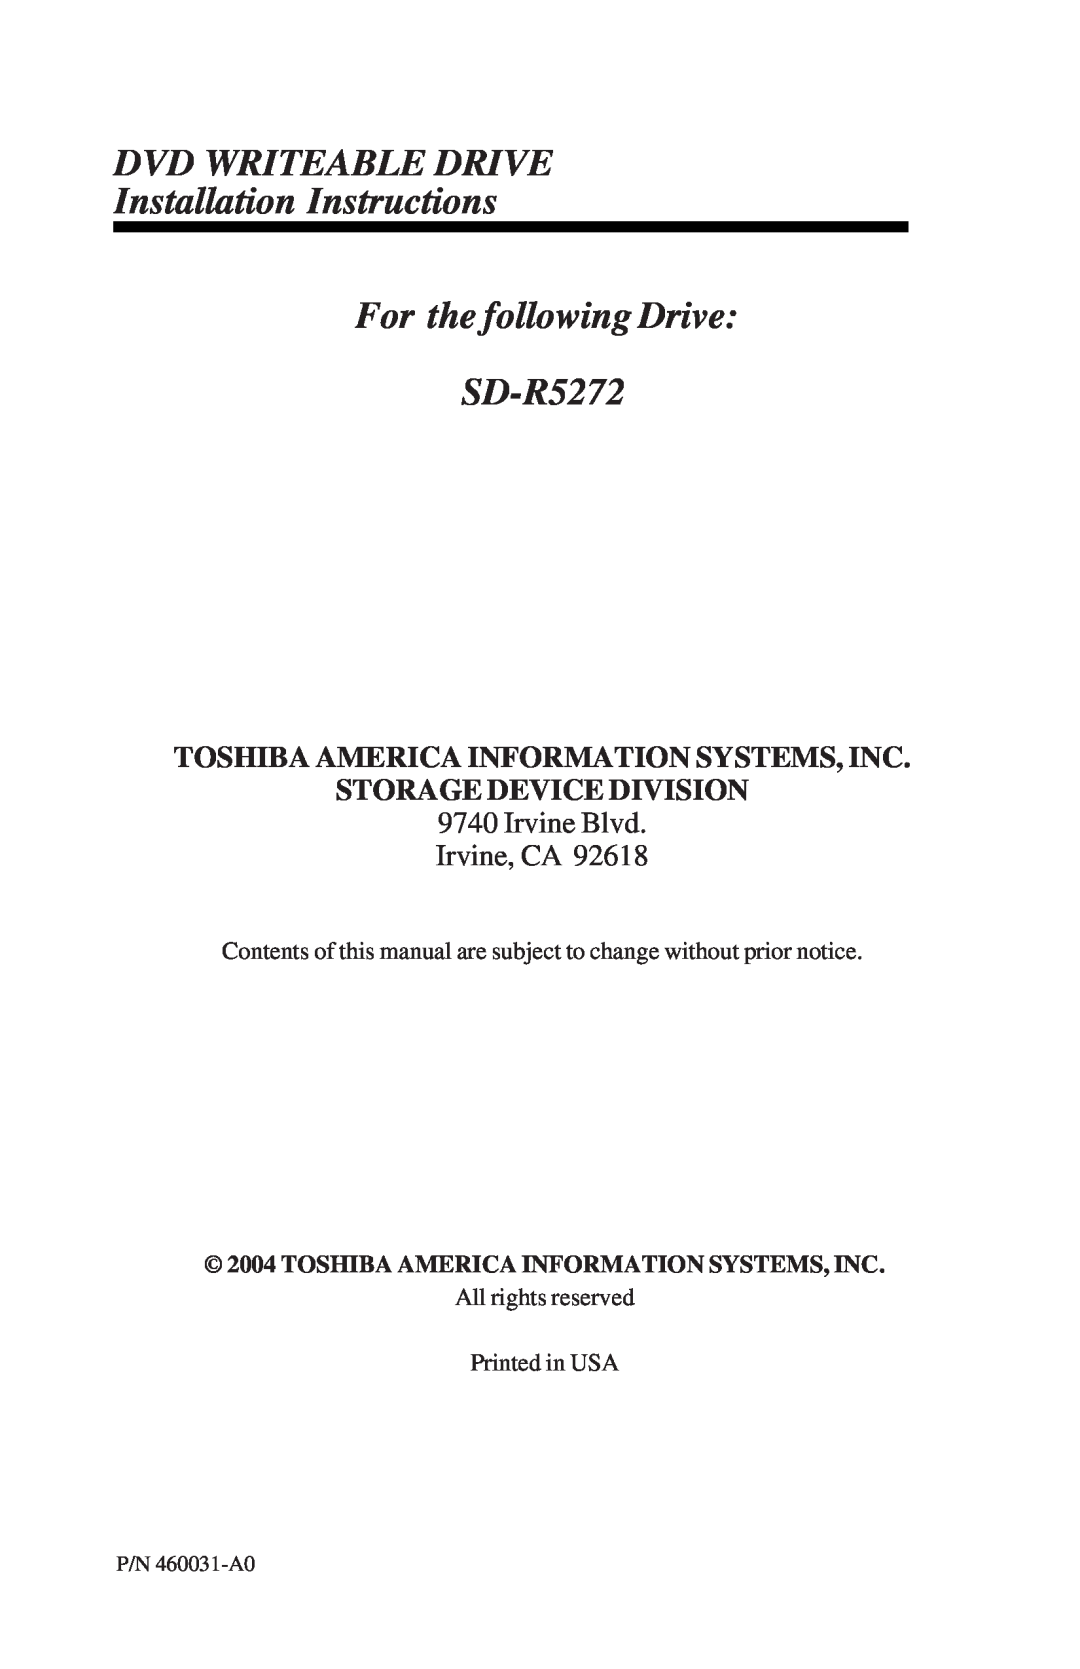 Toshiba SD-R5272 DVD WRITEABLE DRIVE Installation Instructions For the following Drive, Irvine Blvd Irvine, CA 